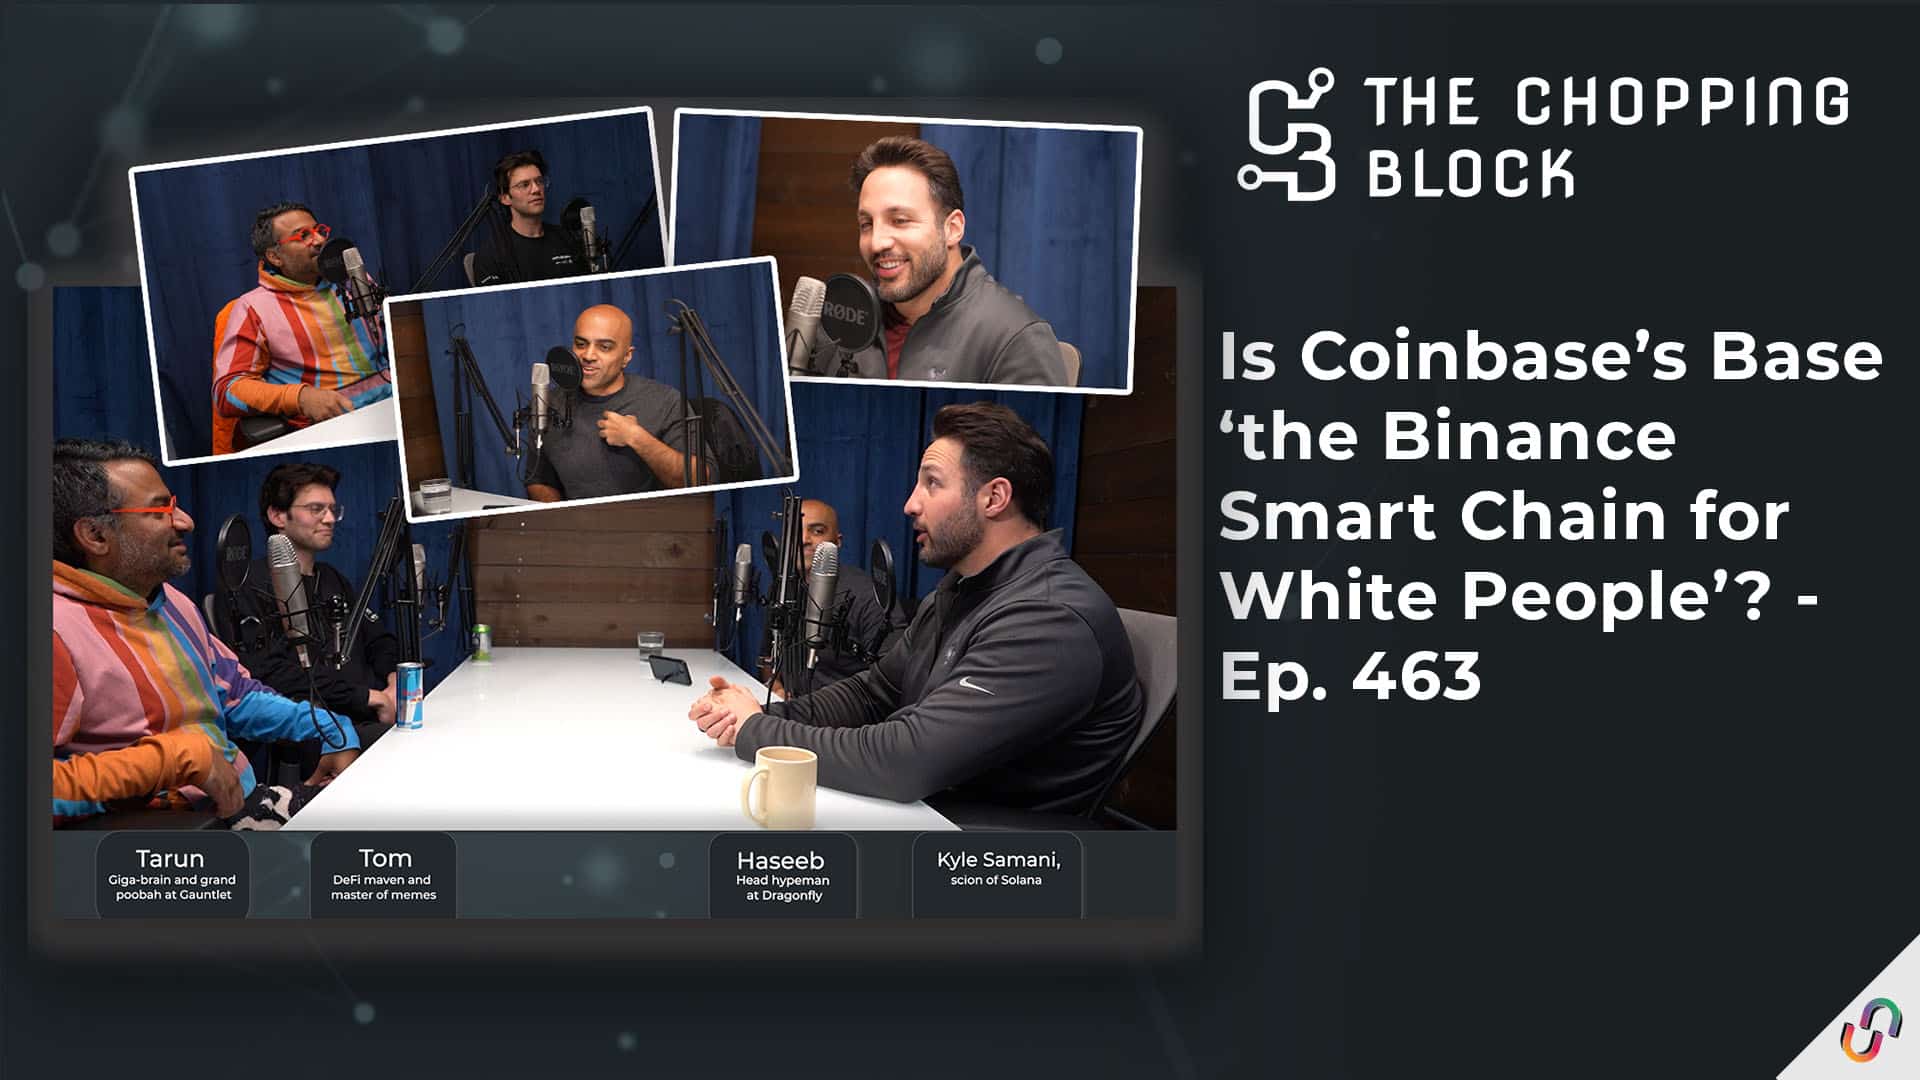 The Chopping Block: Is Coinbase’s Base ‘the Binance Smart Chain for White People’? - Ep. 463